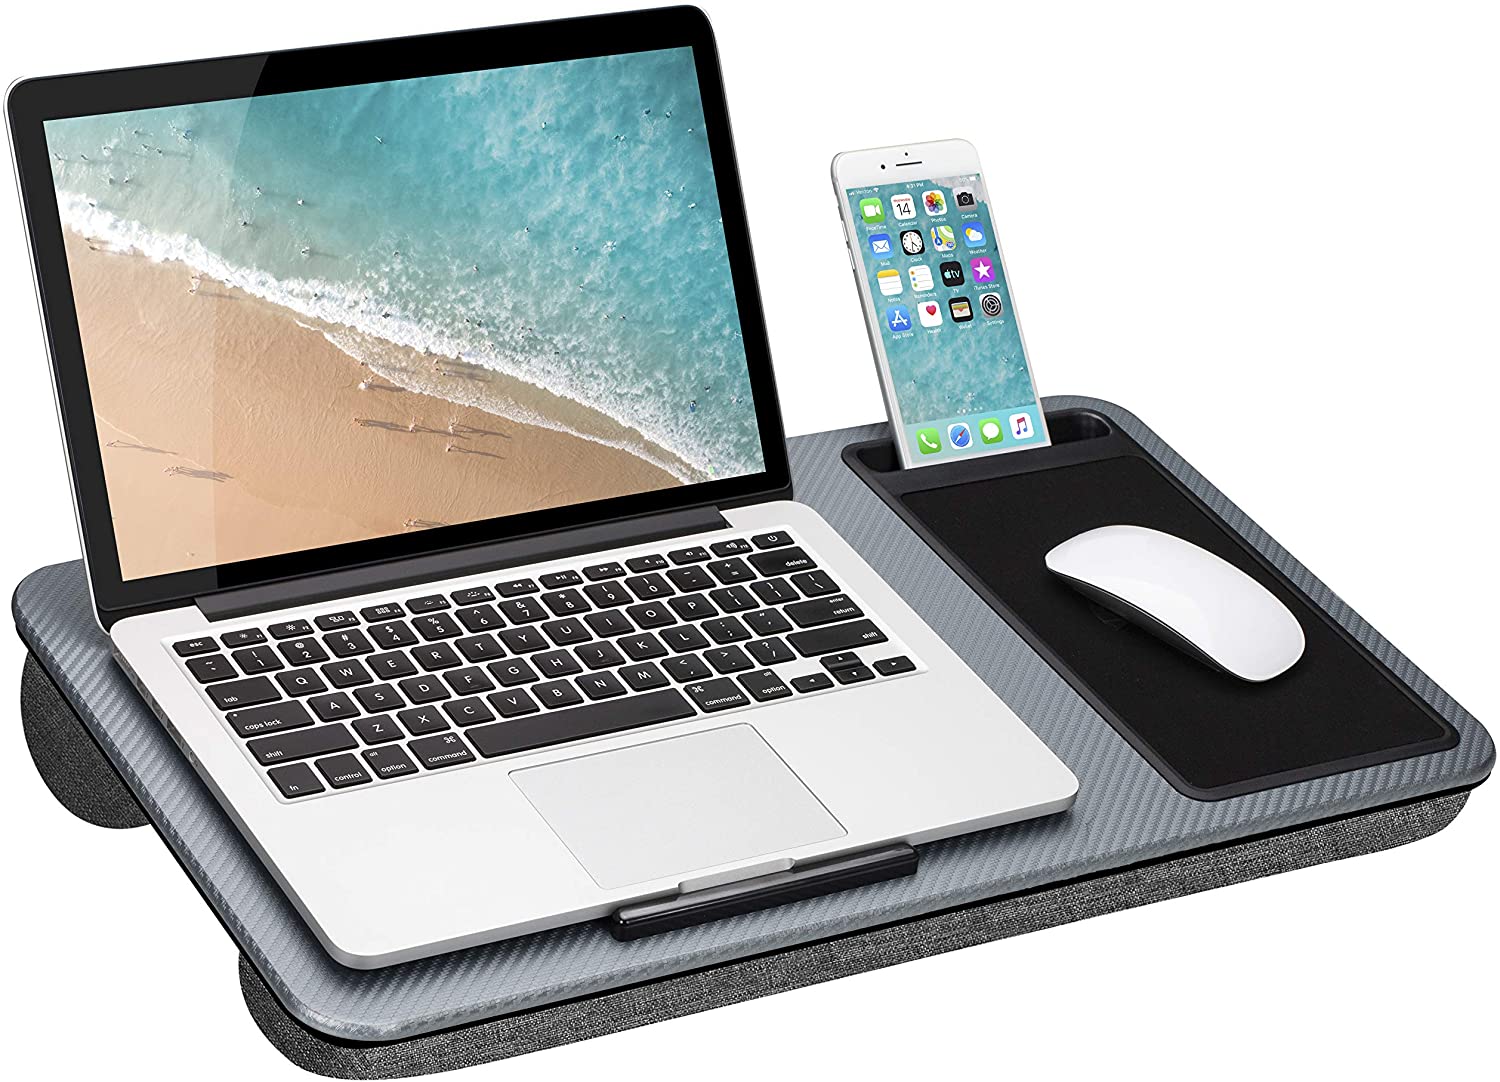 Home Office Lap Desk or Laptop stand.